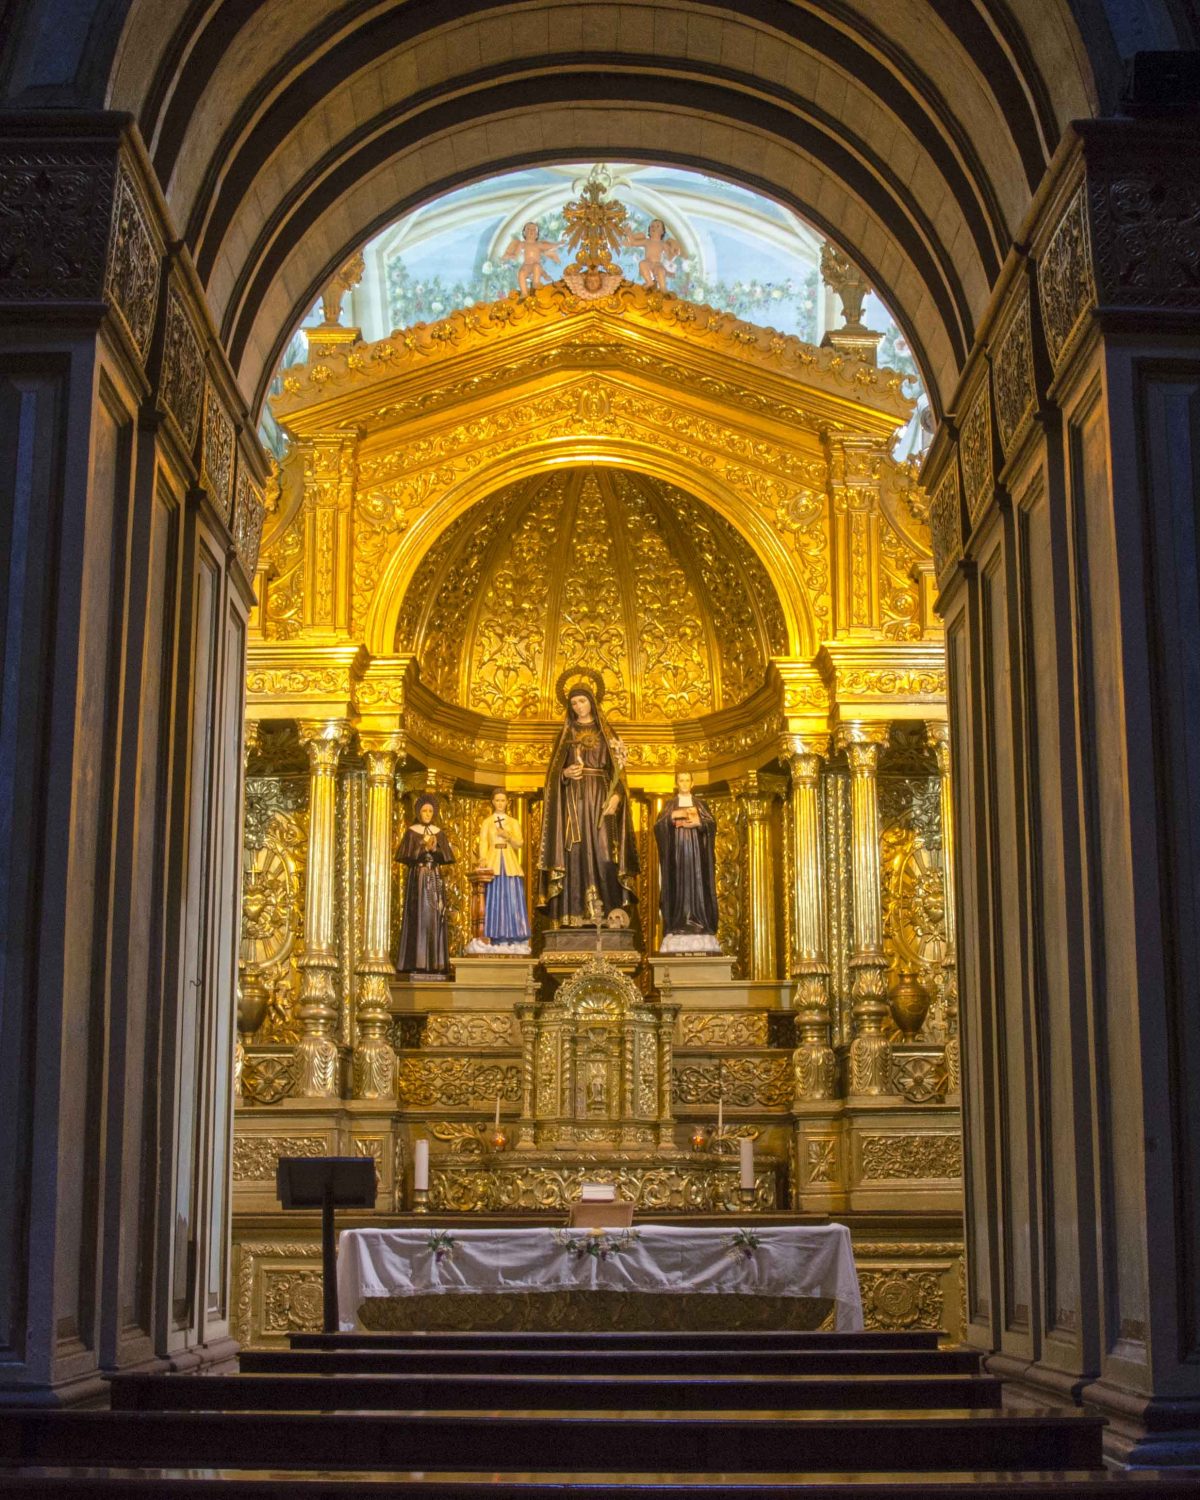 Side chapel bathes in gold with central statue of the Virgin Mary